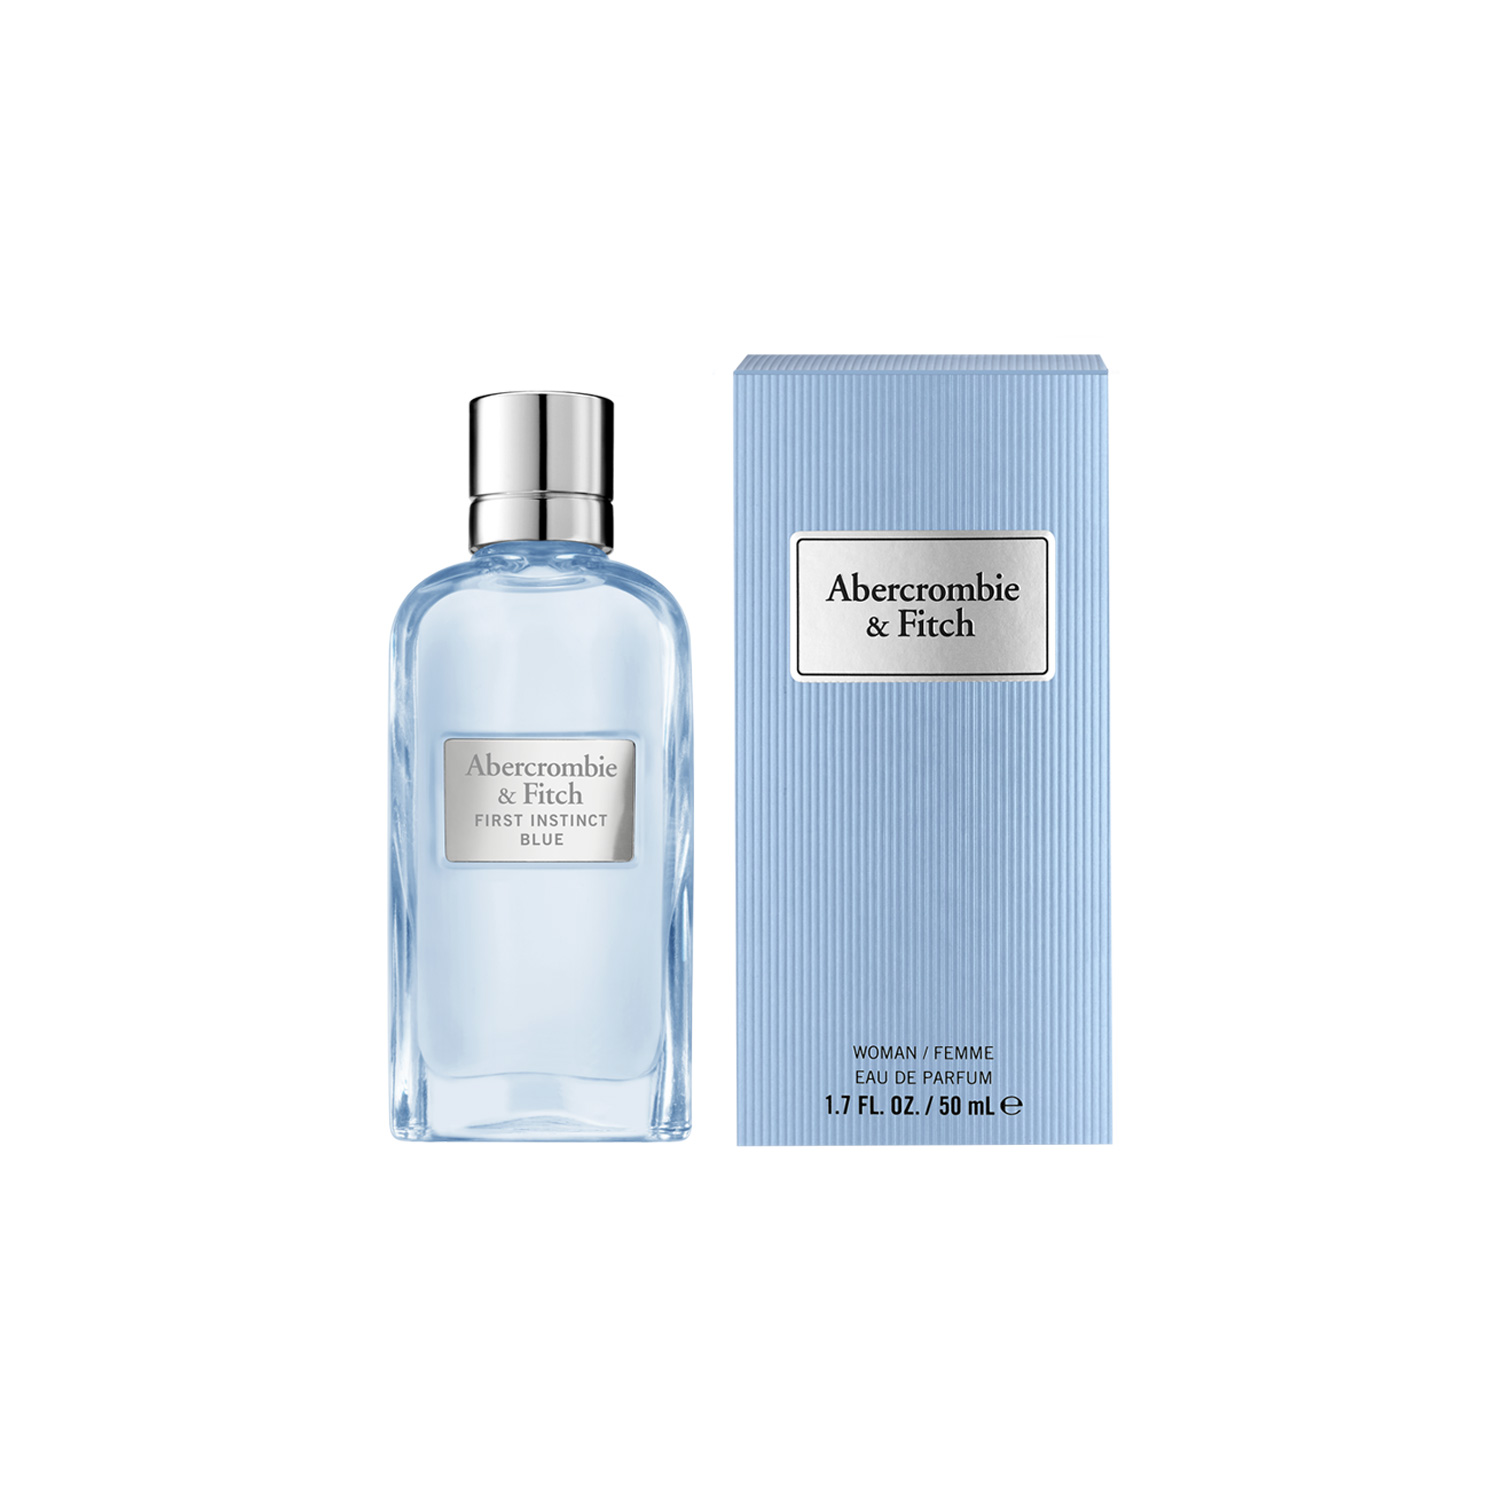 ABERCROMBIE & FITCH FIRST INSTINCT BLUE WOMAN